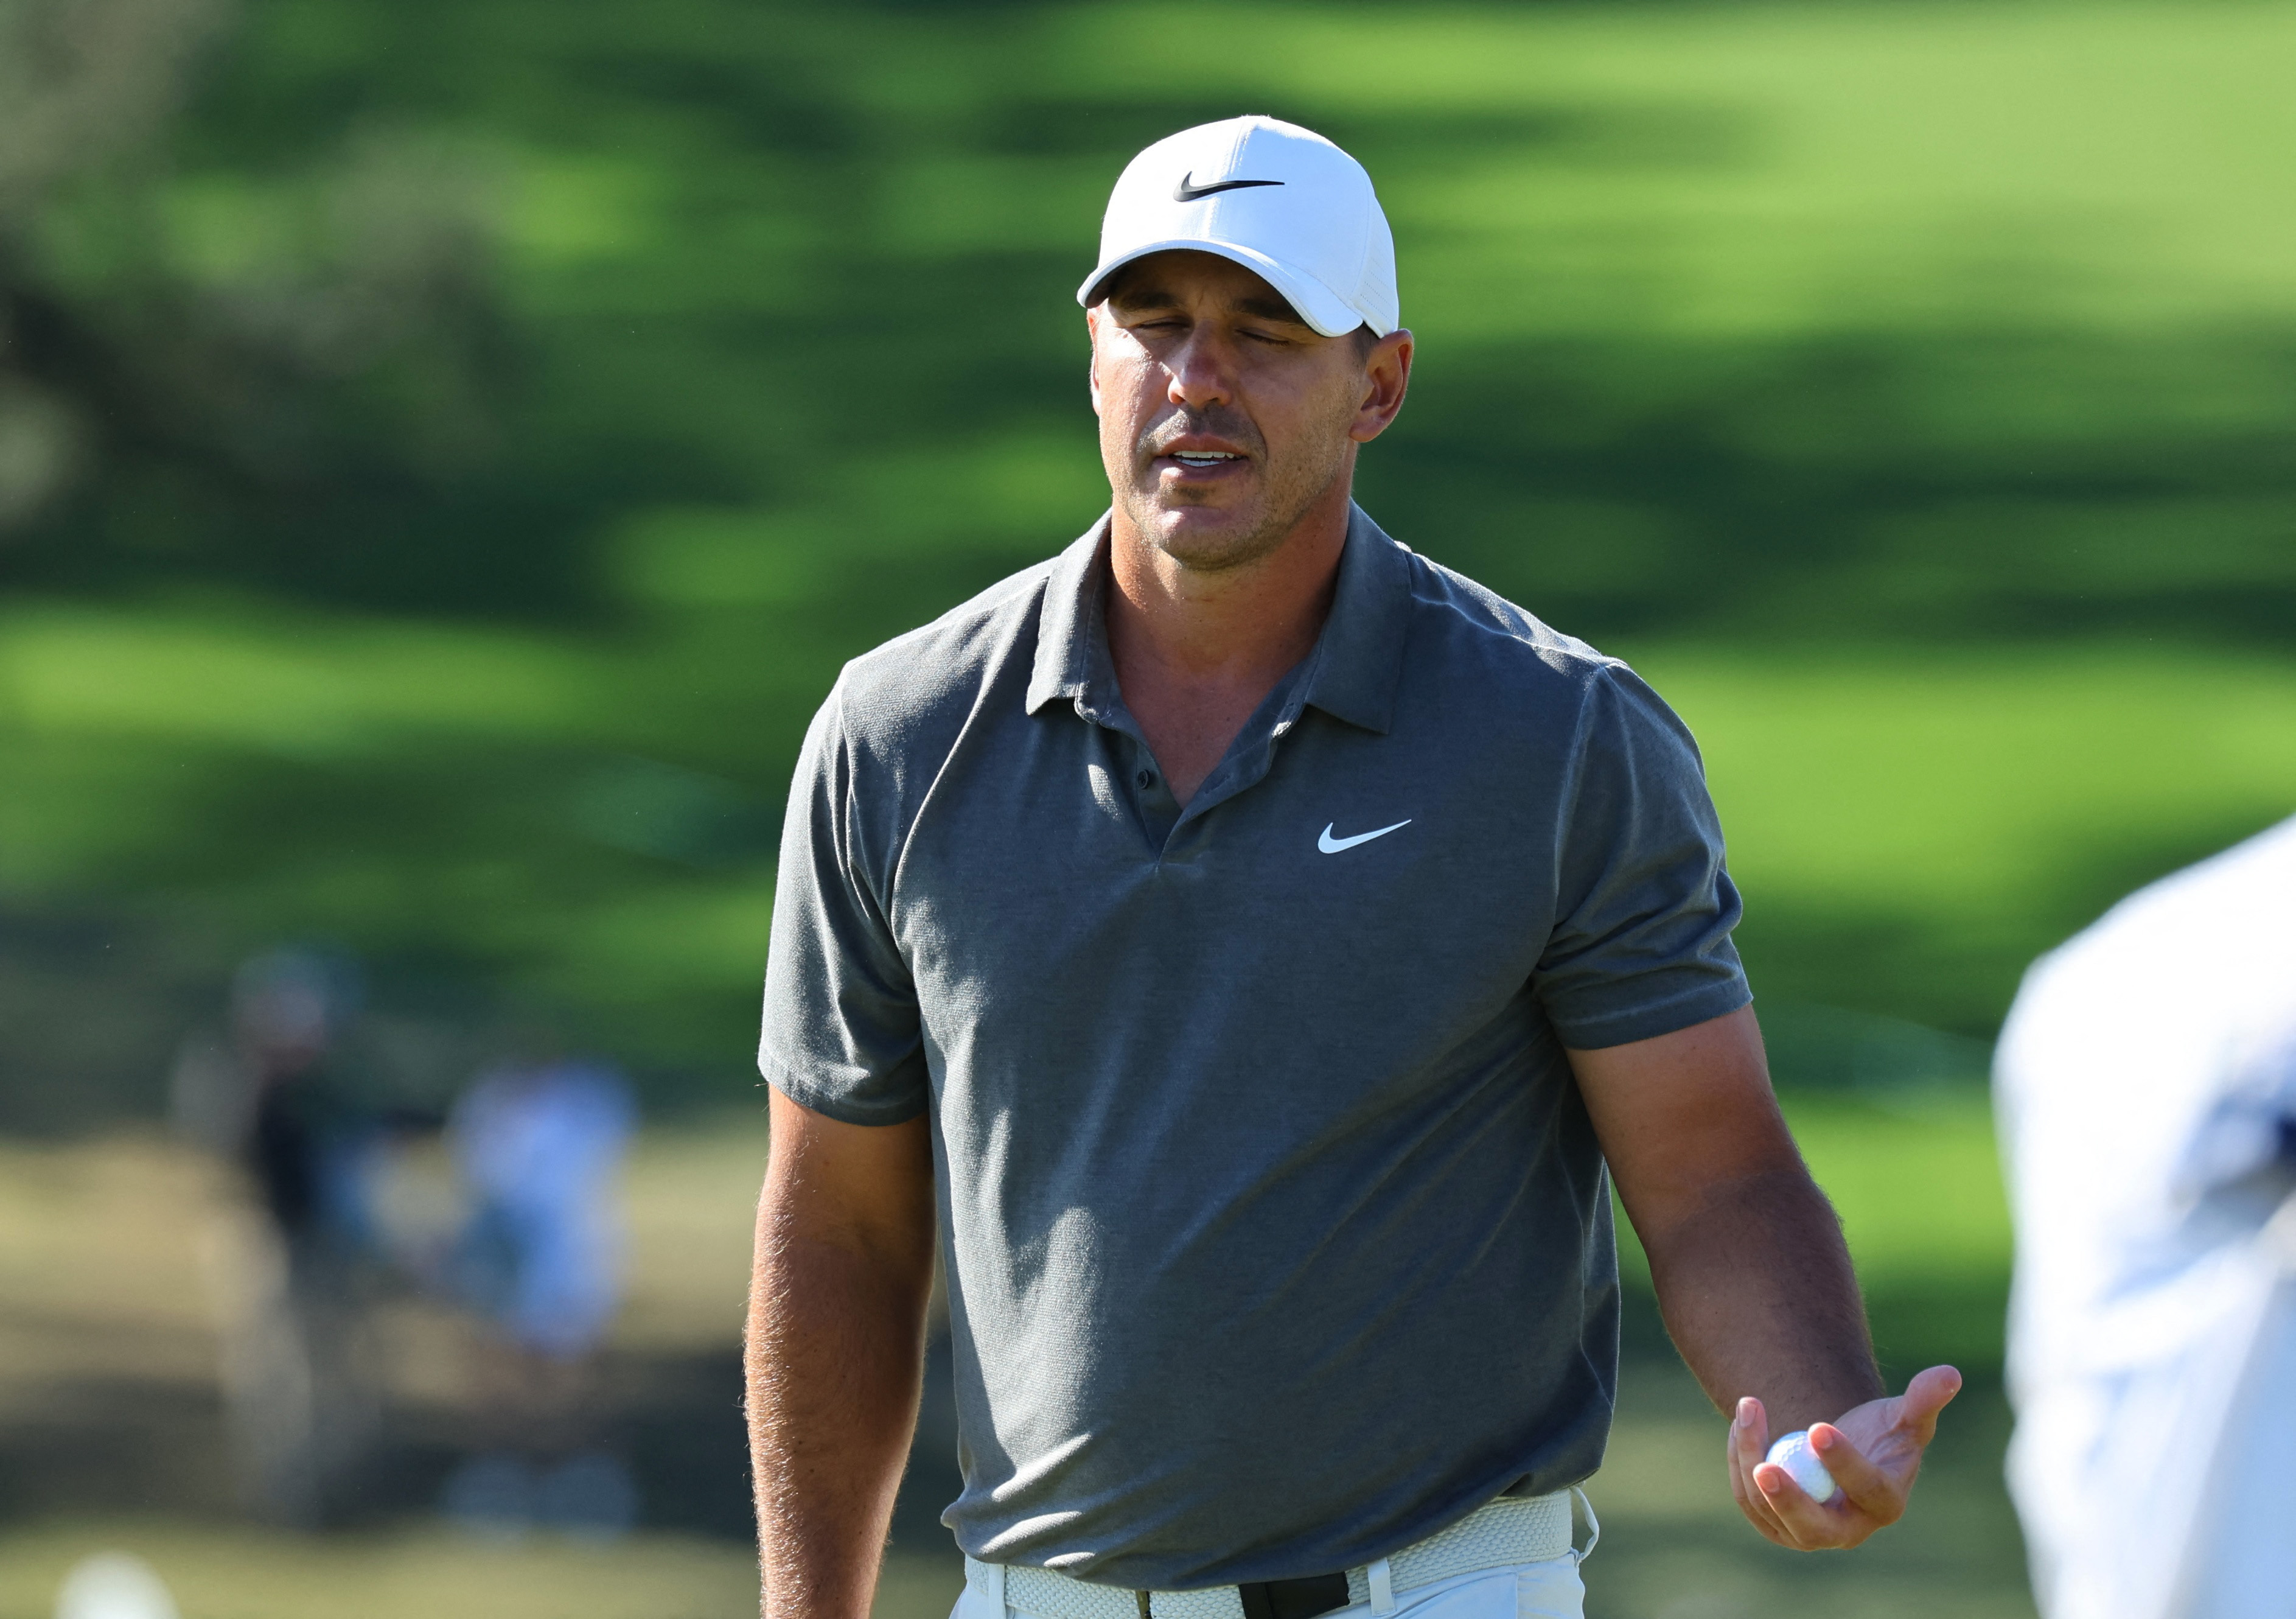 LIV Golf's Koepka comes up short in bid to spoil Masters party | Reuters